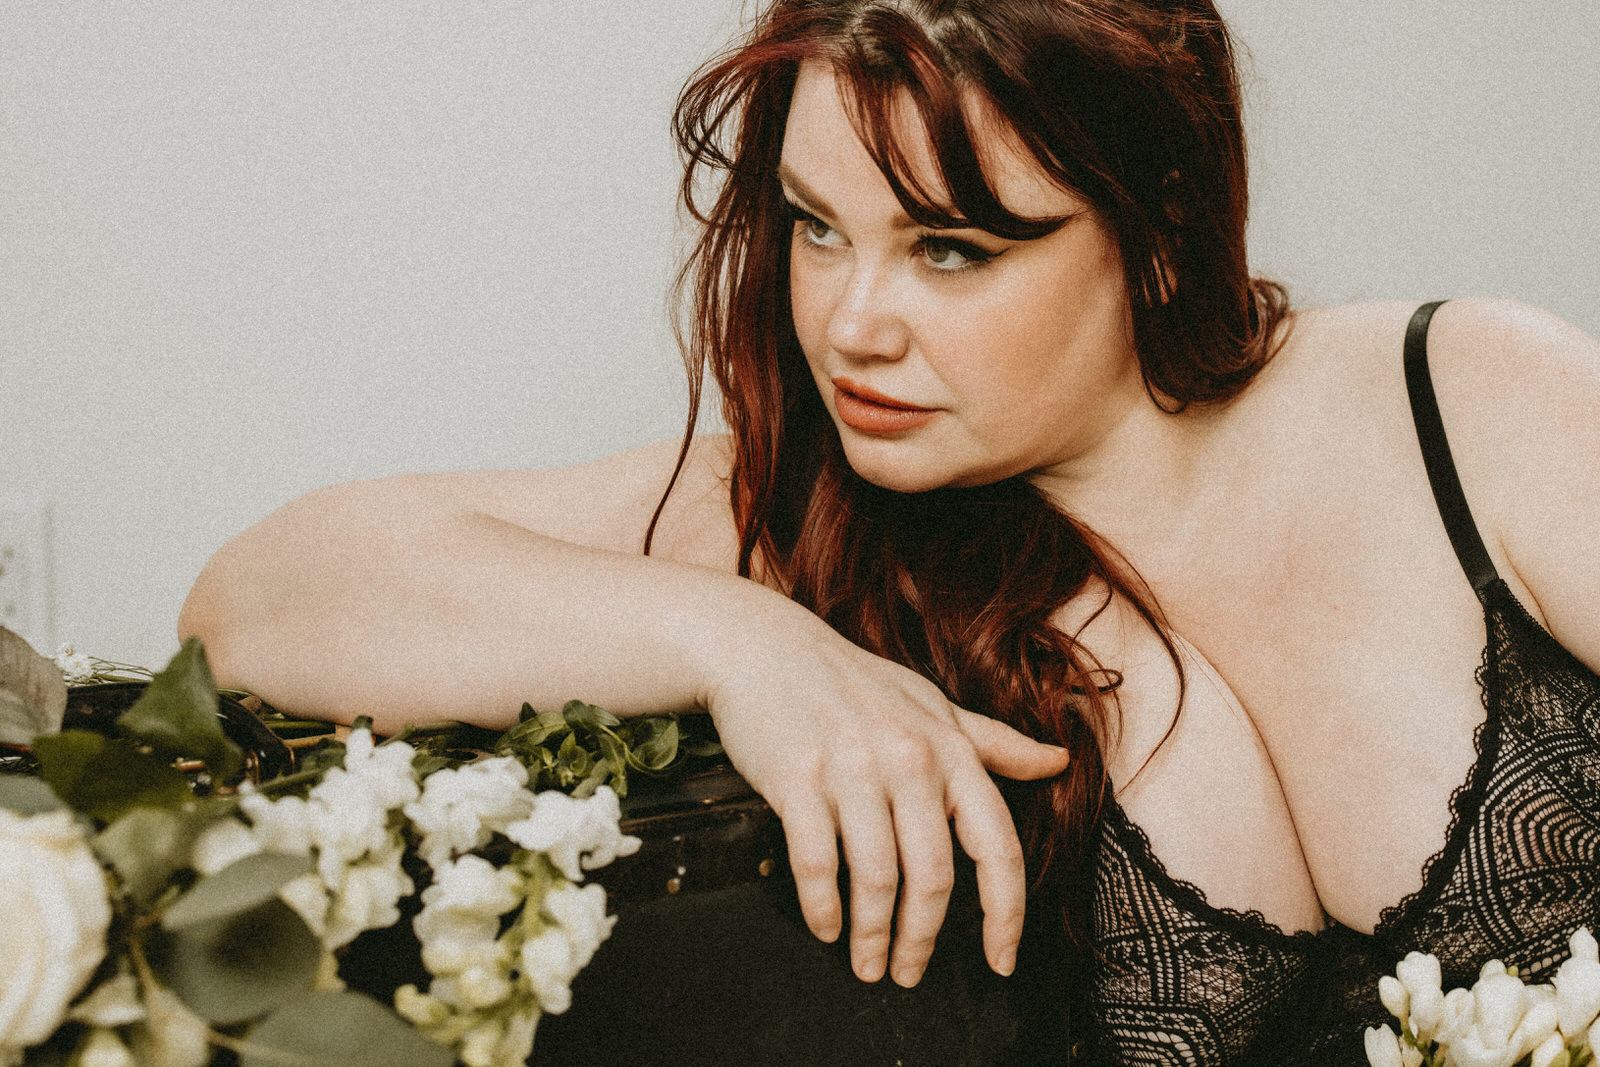 Plus size boudoir photo of a woman leaning holding flowers